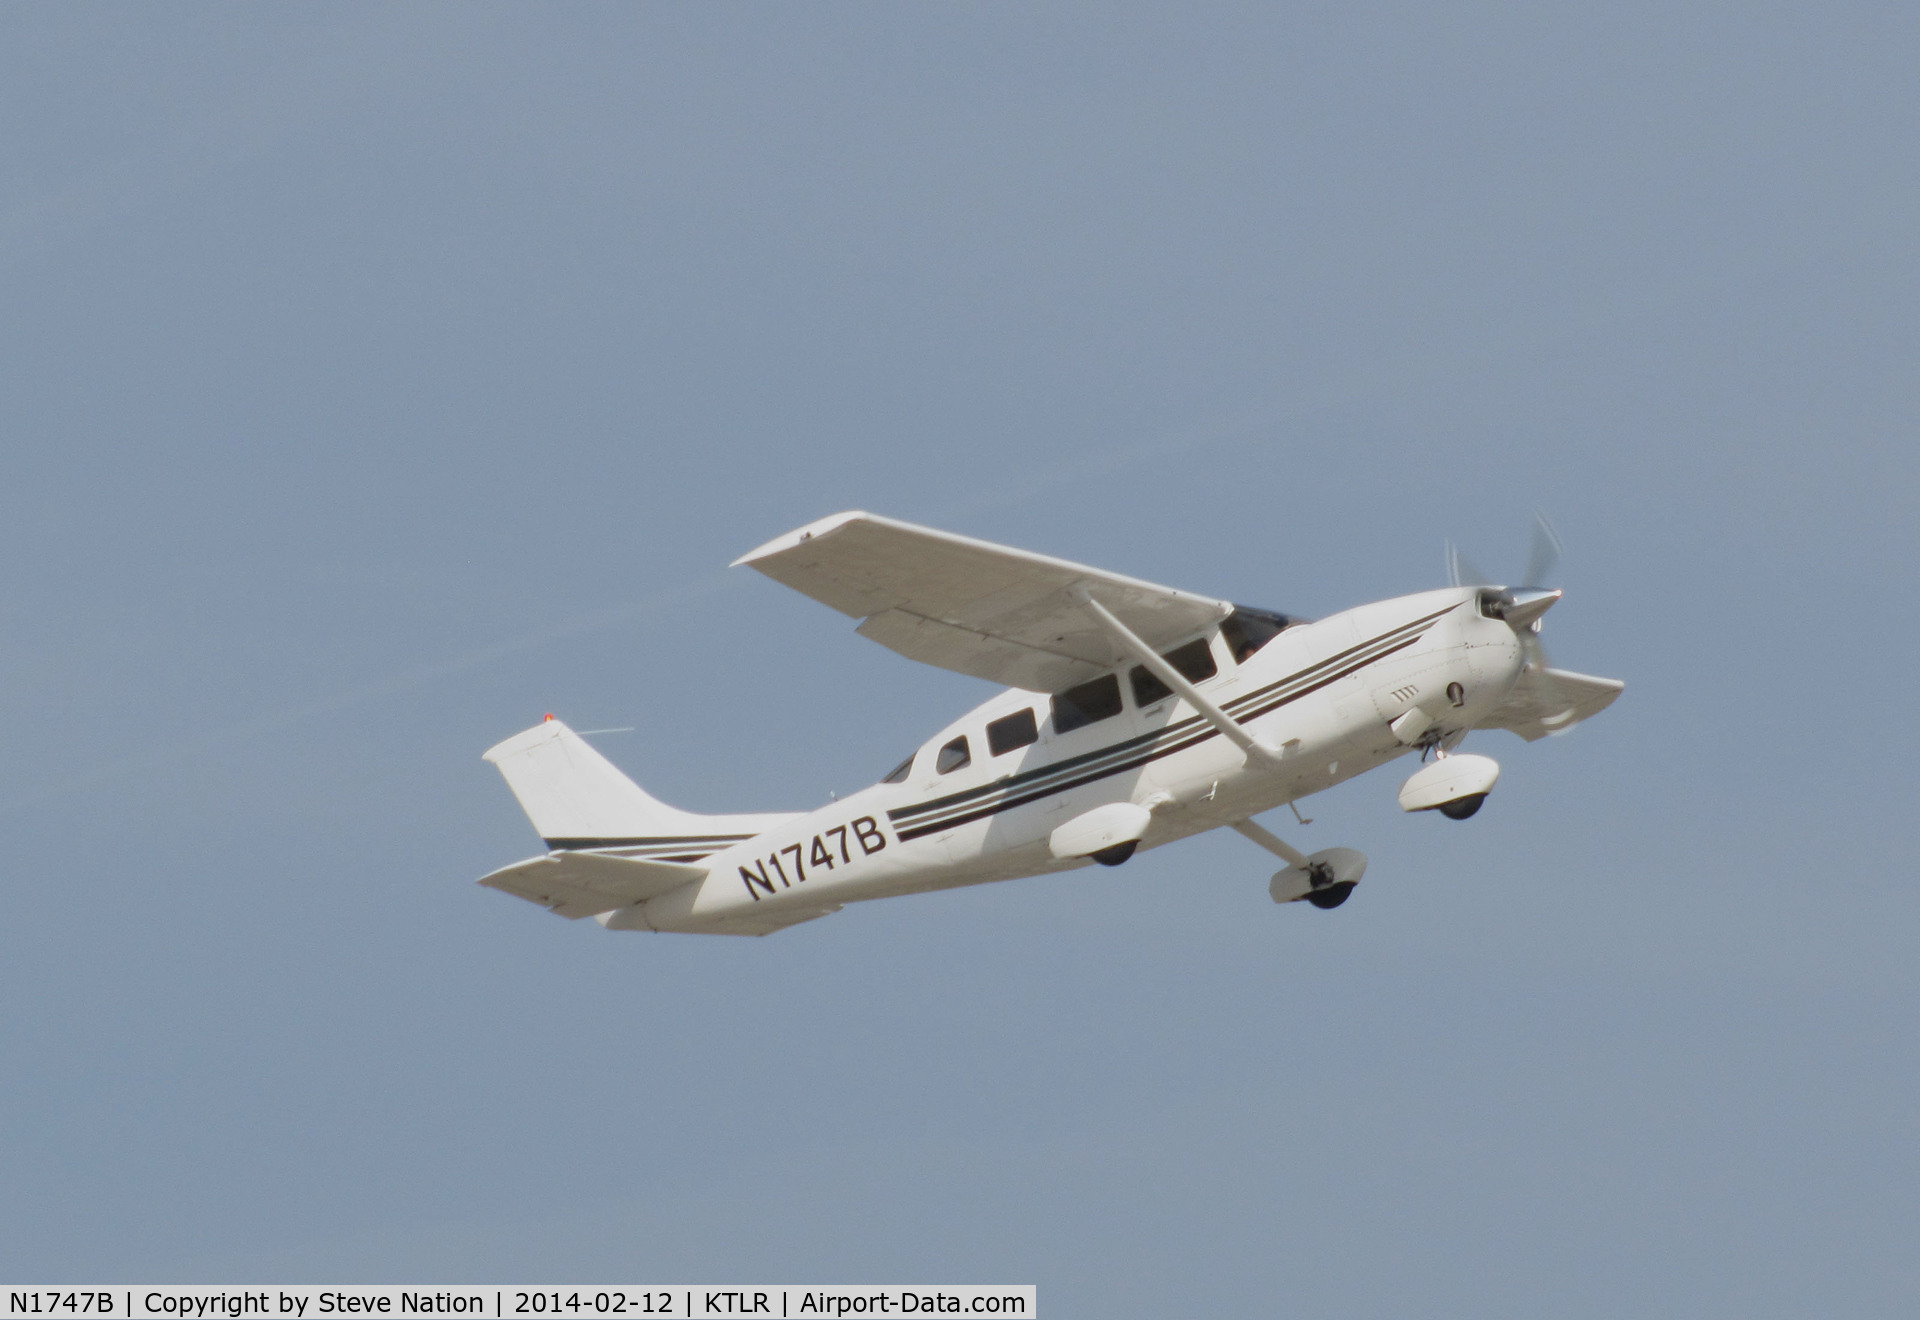 N1747B, 1980 Cessna T207A C/N 20700666, privately-owned Cessna T207A departing Mefford Field (Tulare, CA) after visiting 2014 International Ag Expo